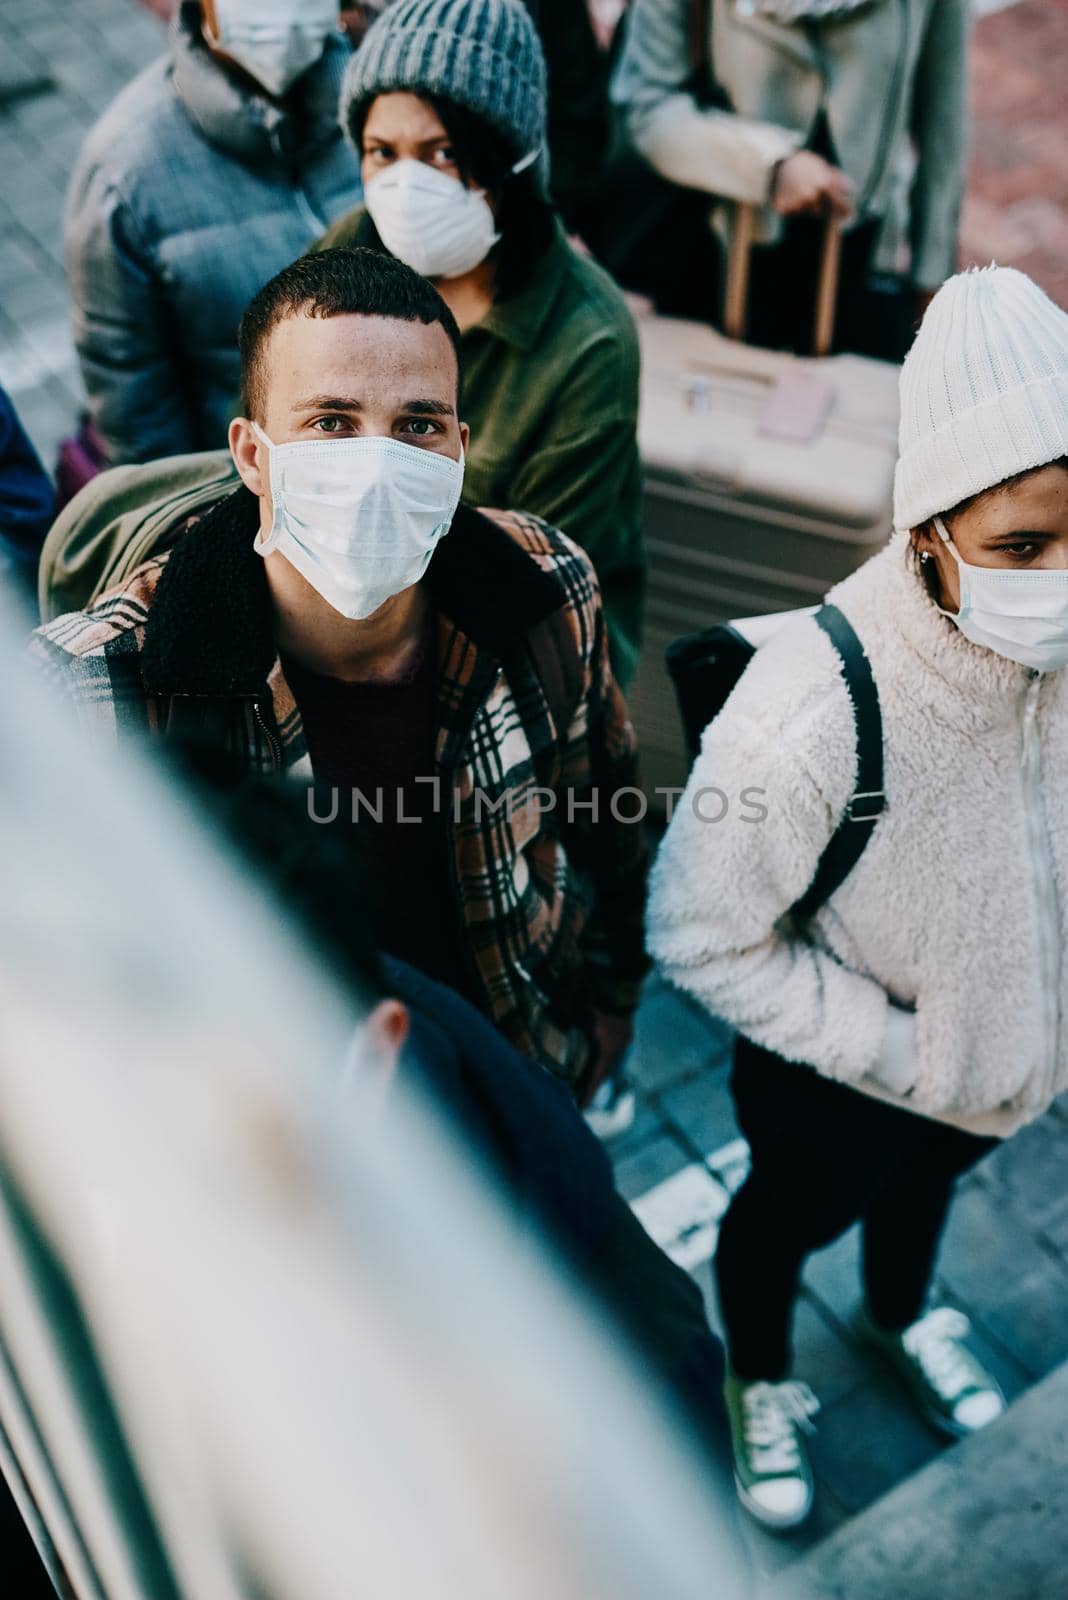 People traveling during covid travel restrictions are waiting for coronavirus testing. Portrait of tourists or travelers walking on stairs in a public airport during a lockdown due to virus outbreak by YuriArcurs